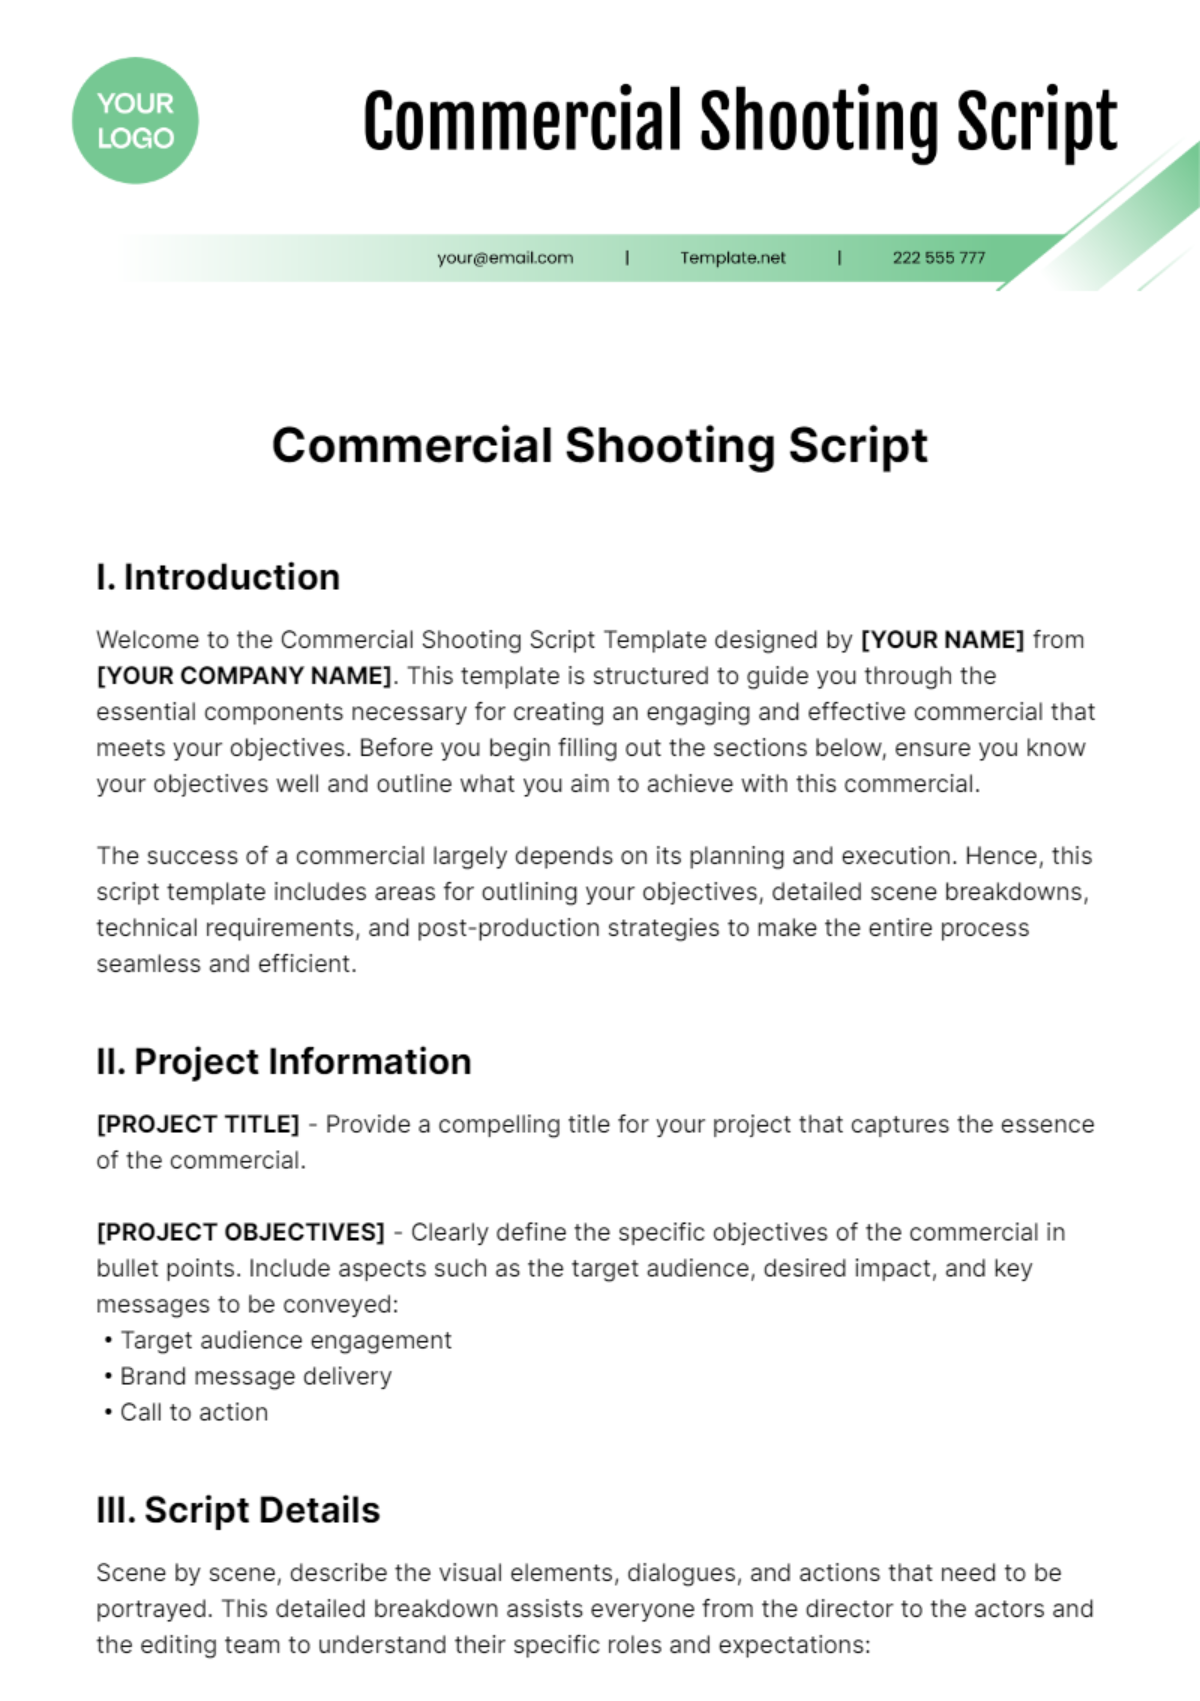 Commercial Shooting Script Template